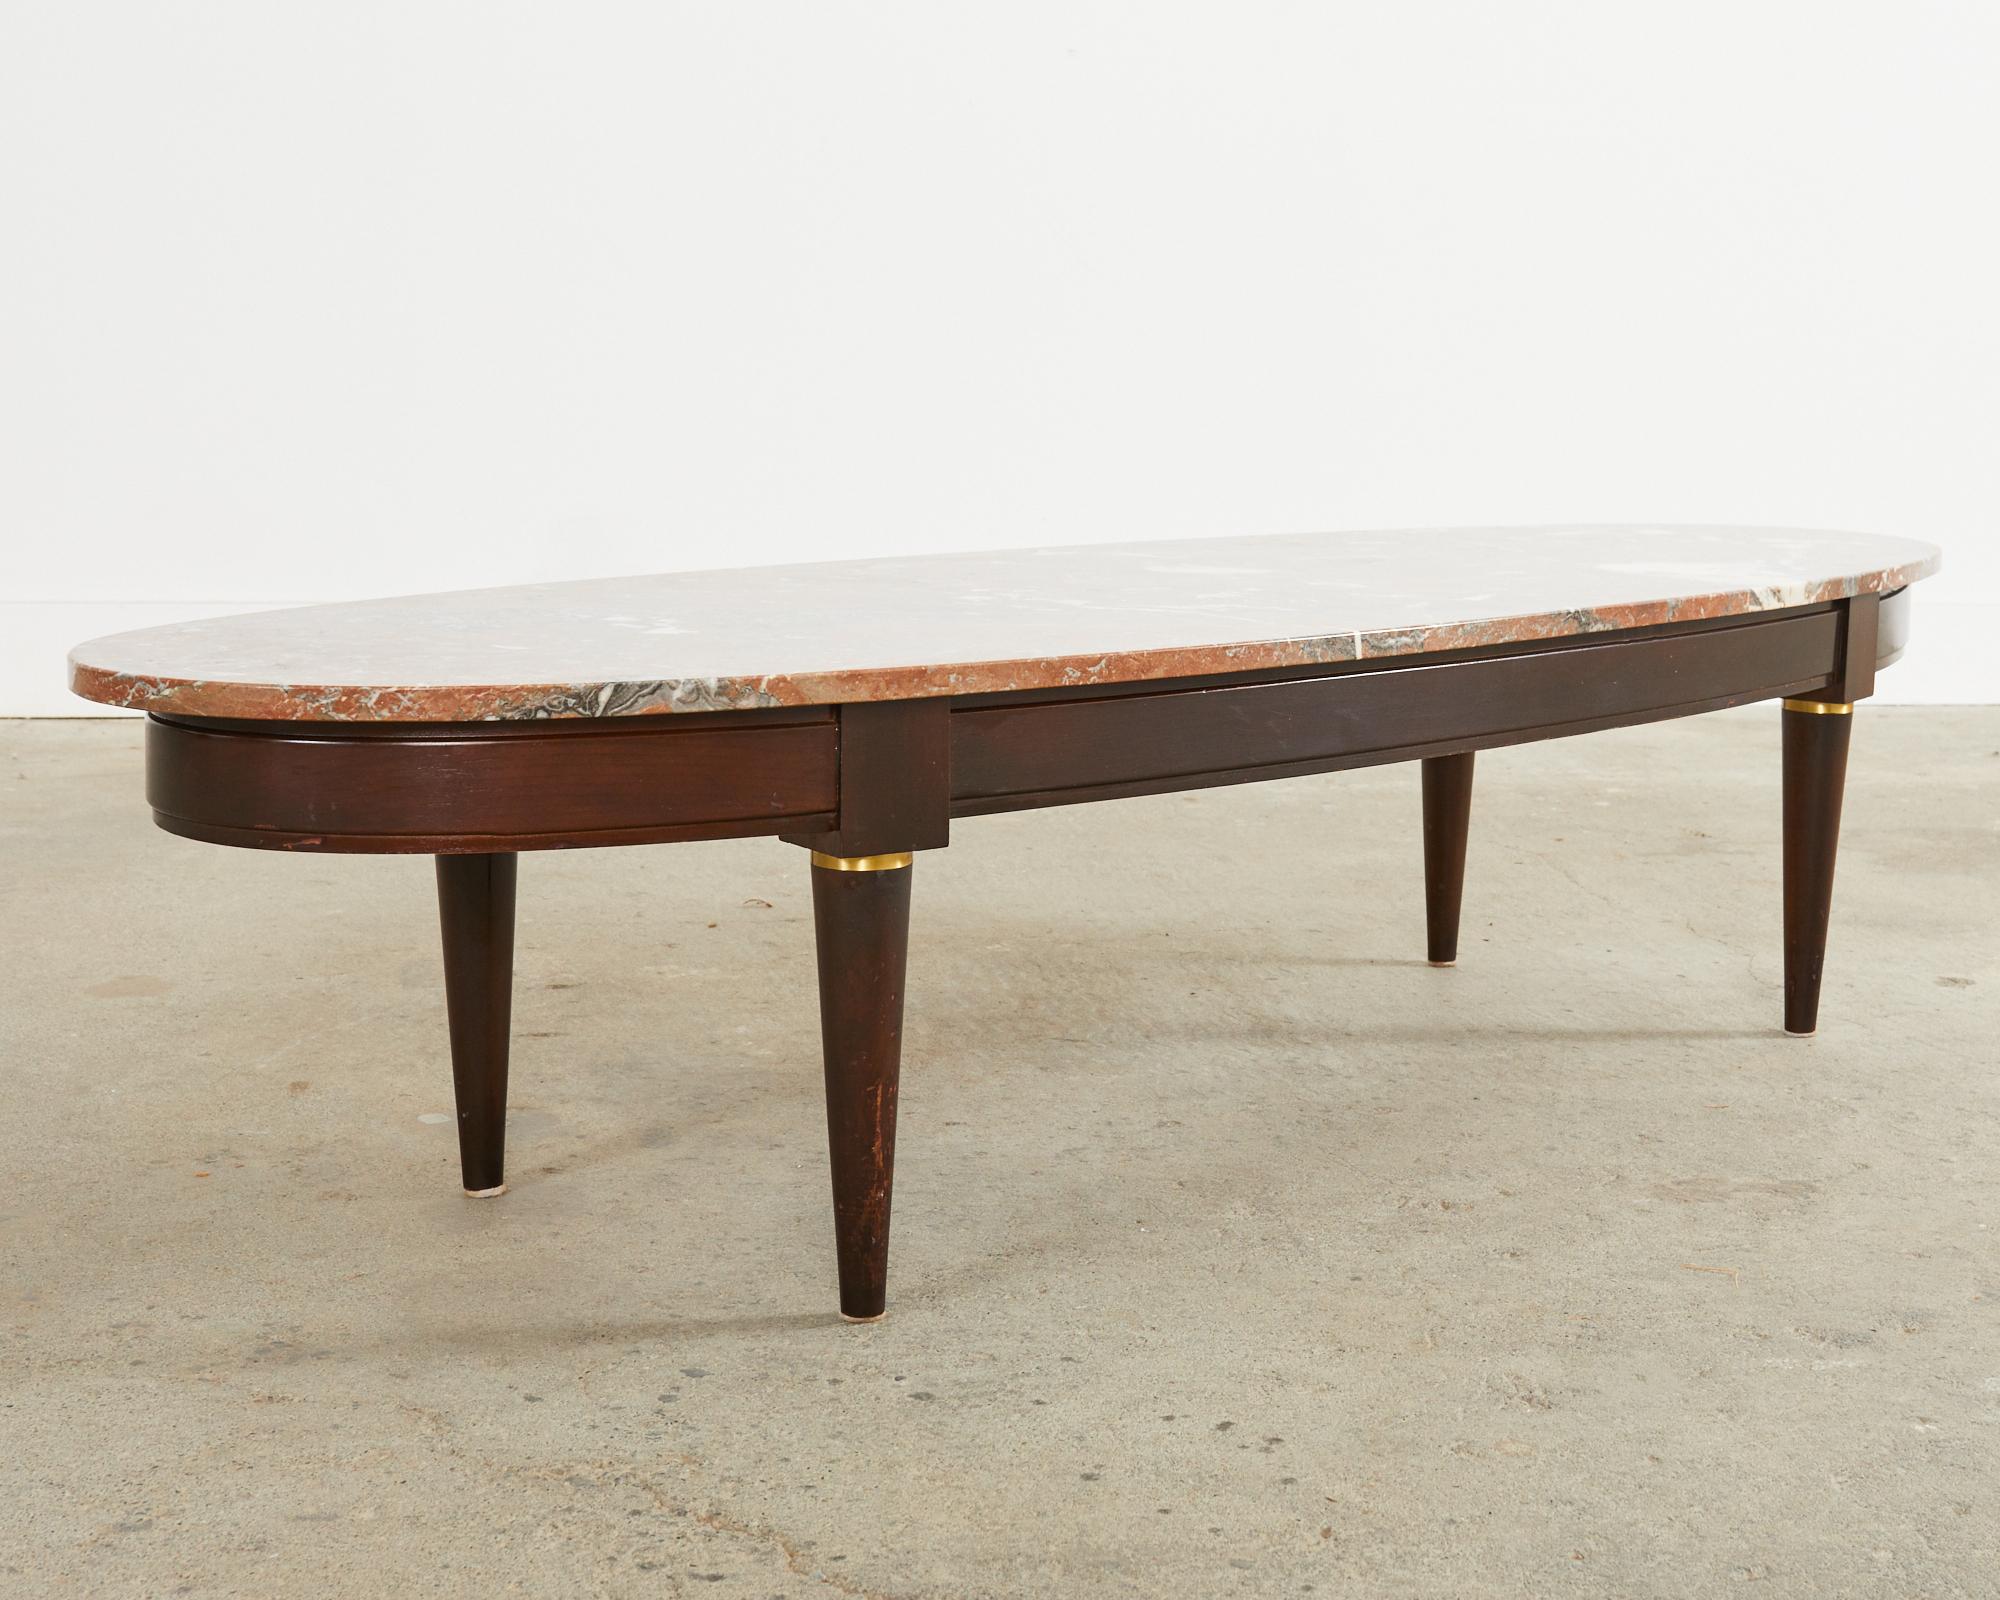 Stylish Mid-Century Modern Dutch surfboard coffee or cocktail table featuring a large, variegated marble top. The top is beautifully veined with vibrant brick red, grey, and white marbling throughout the slab. Supported by a hand-formed mahogany